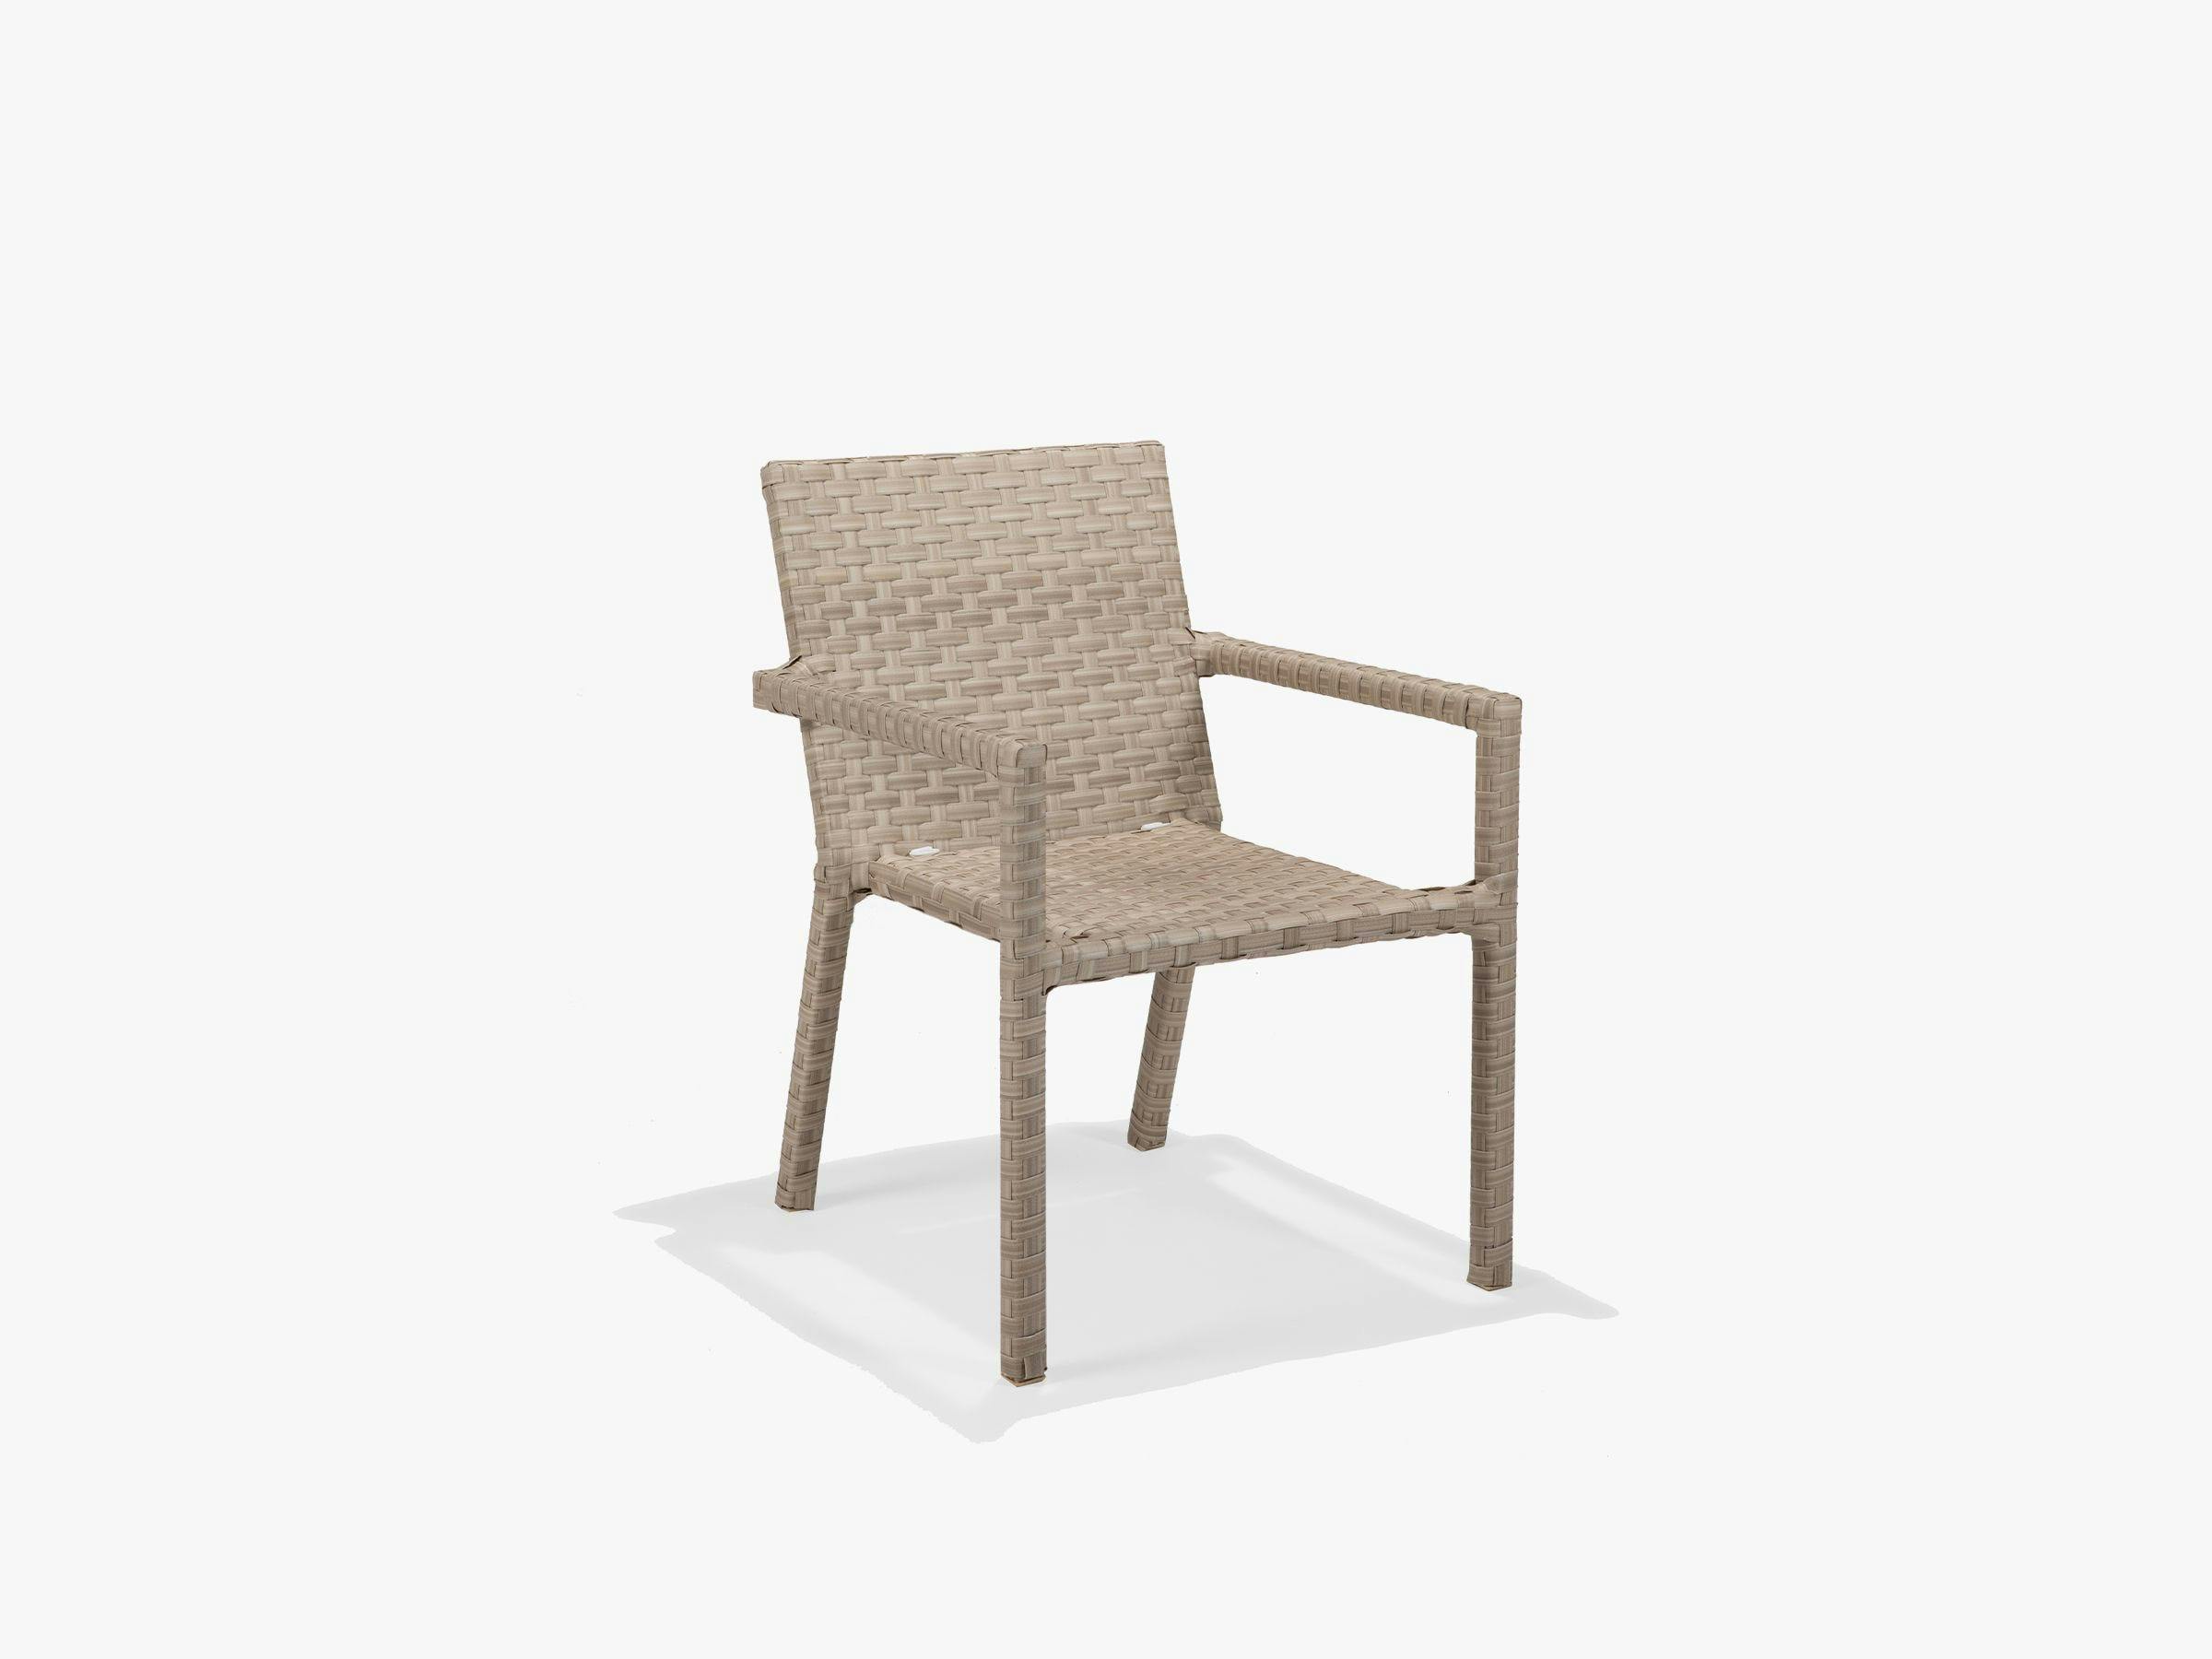 Nexus Stacking Dining Chair w/ Arms - Driftwood Weave